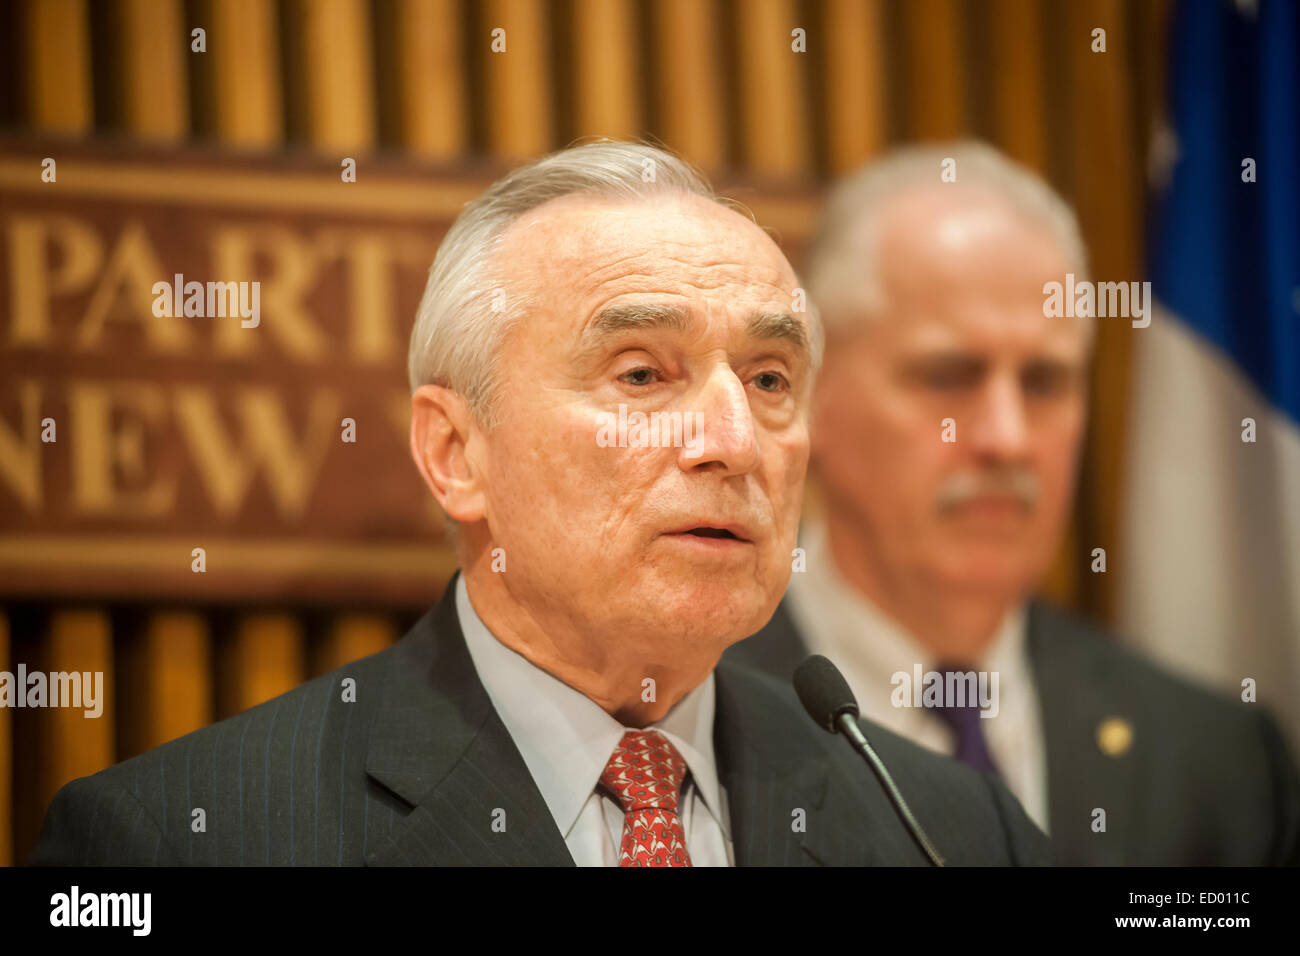 New York, NY, USA. 22nd Dec, 2014. NYPD Commissioner William Bratton briefs the media in One Police Plaza about the ongoing investigation of the assassination of two NYPD officers, Wenjian Liu and Rafael Ramos by Ismaaiyl Brinsley.  The officers were murdered in Brooklyn in their squad car by Brinsley allegedly in retaliation for the Eric Garner death. Brinsley killed himself in the subway during his attempted escape. Credit:  Richard Levine/Alamy Live News Stock Photo